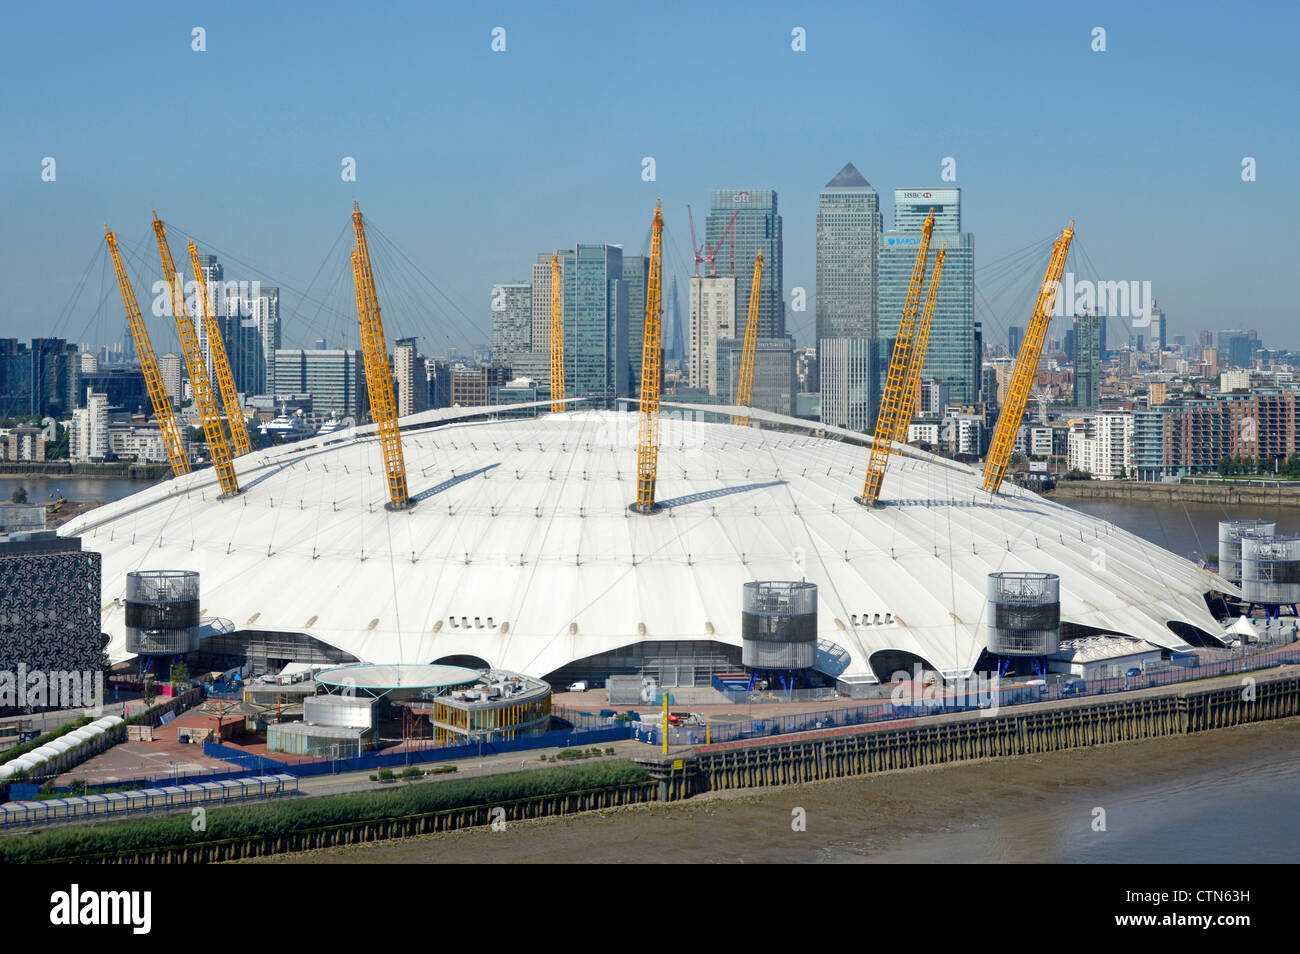 Aerial view O2 dome arena roof of London 2012 Olympic venue on the Greenwich Peninsula with Canary Wharf banking skyscraper skyline beyond England UK Stock Photo